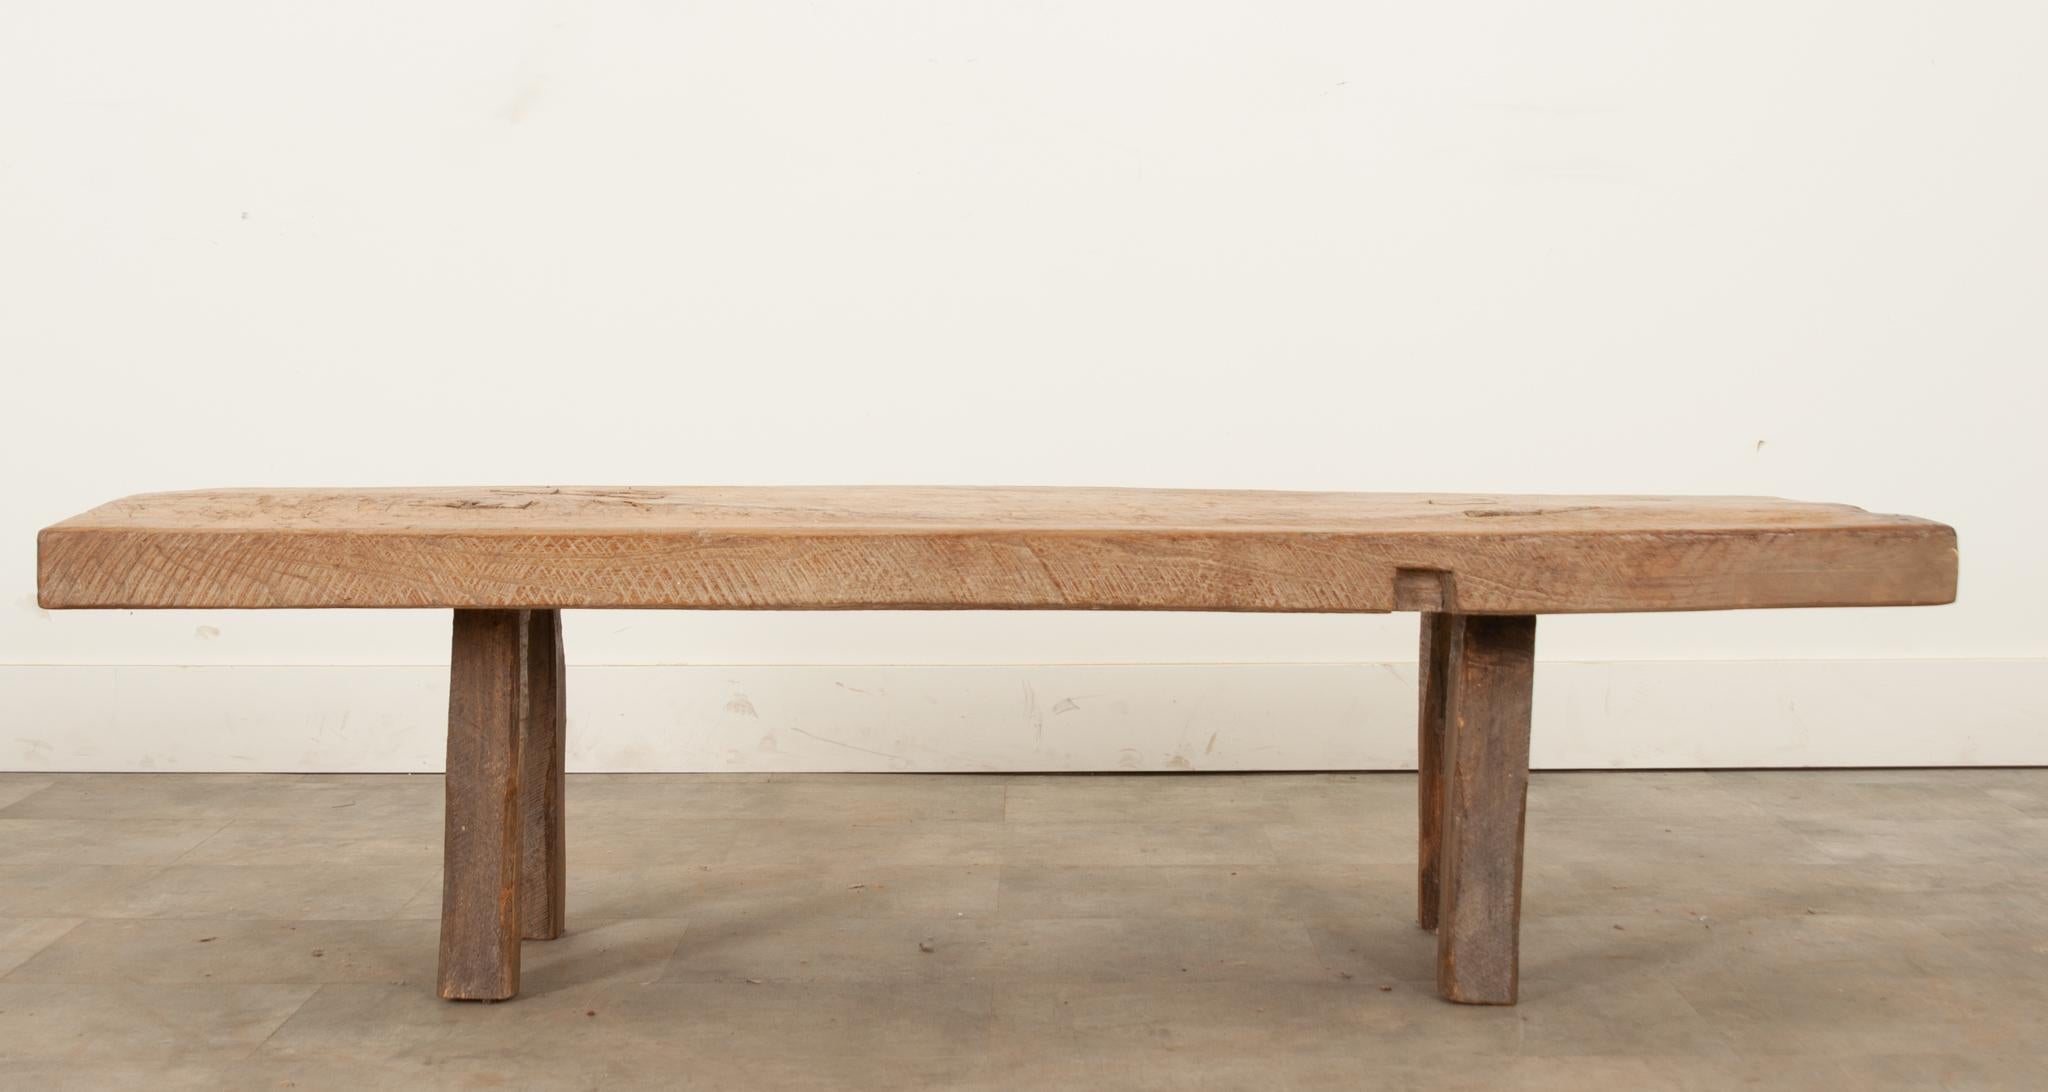 This coffee table is the perfect rustic element for any interior. Hand Felled during the 1860’s from a single board of solid sycamore wood, it has gained a fantastic patina from years of everyday use. You can see the square joinery on top where the